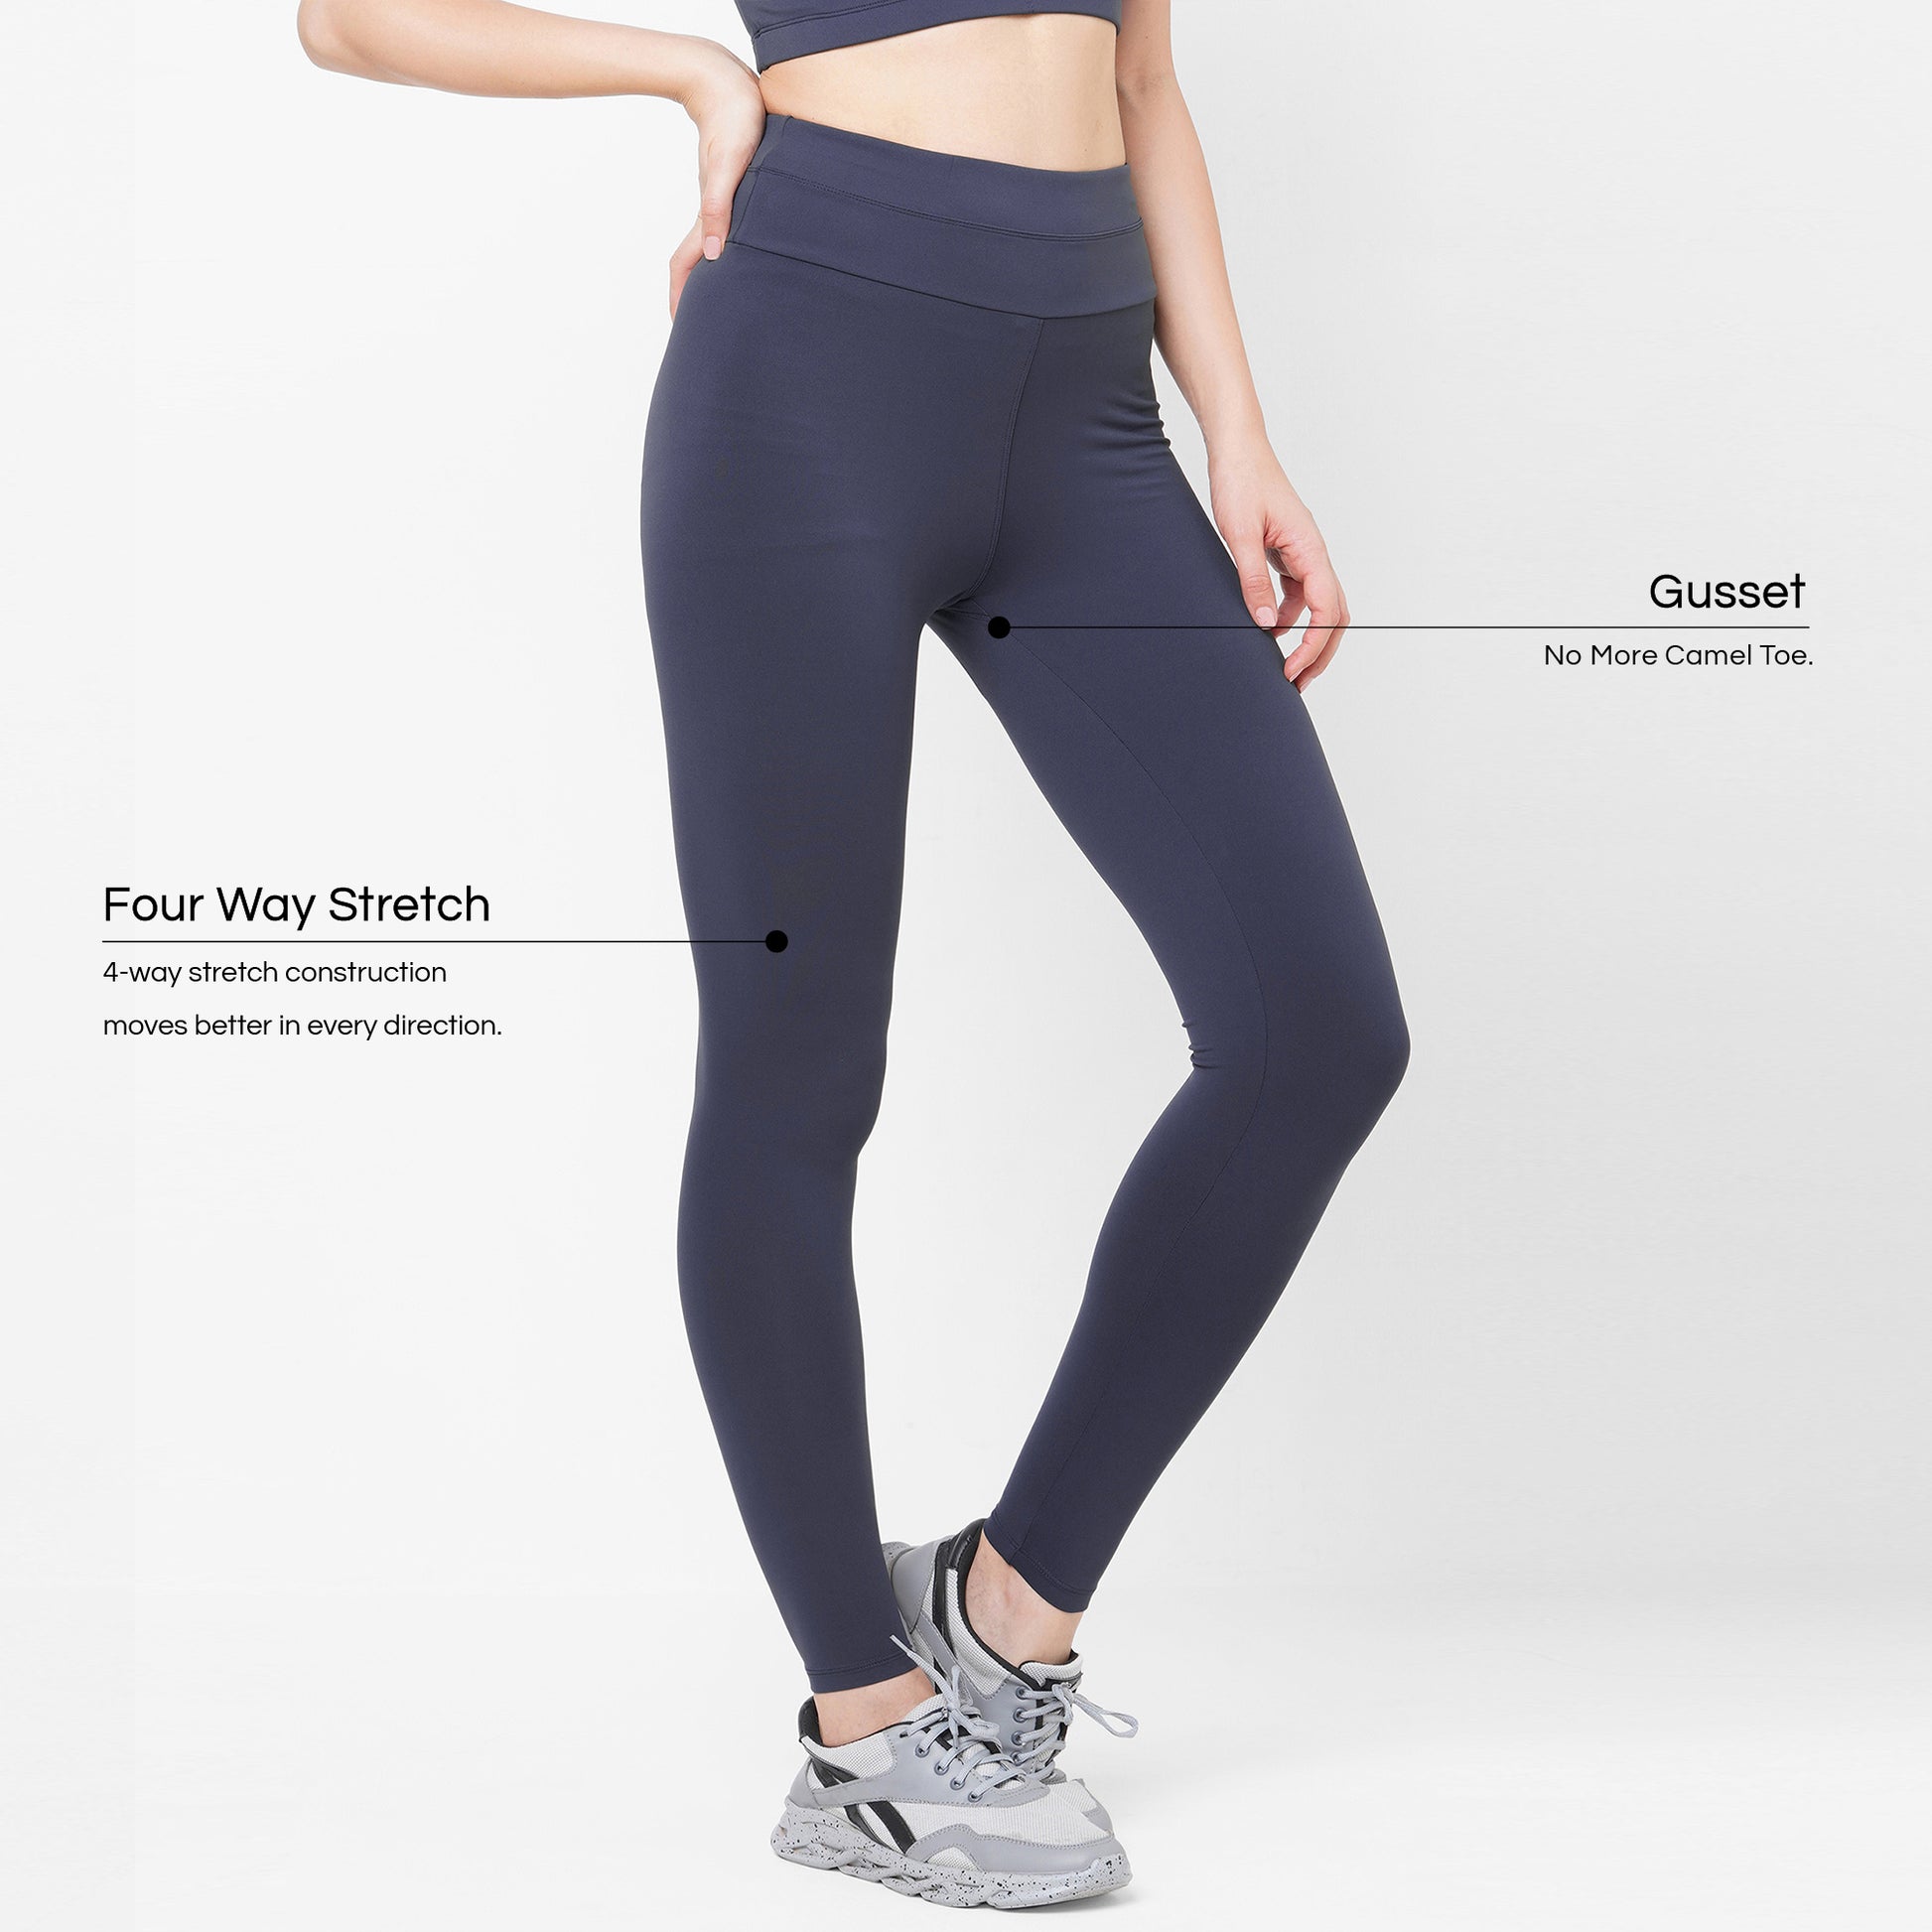 Cameltoe Yogawear flexable breathable clothing that goes the